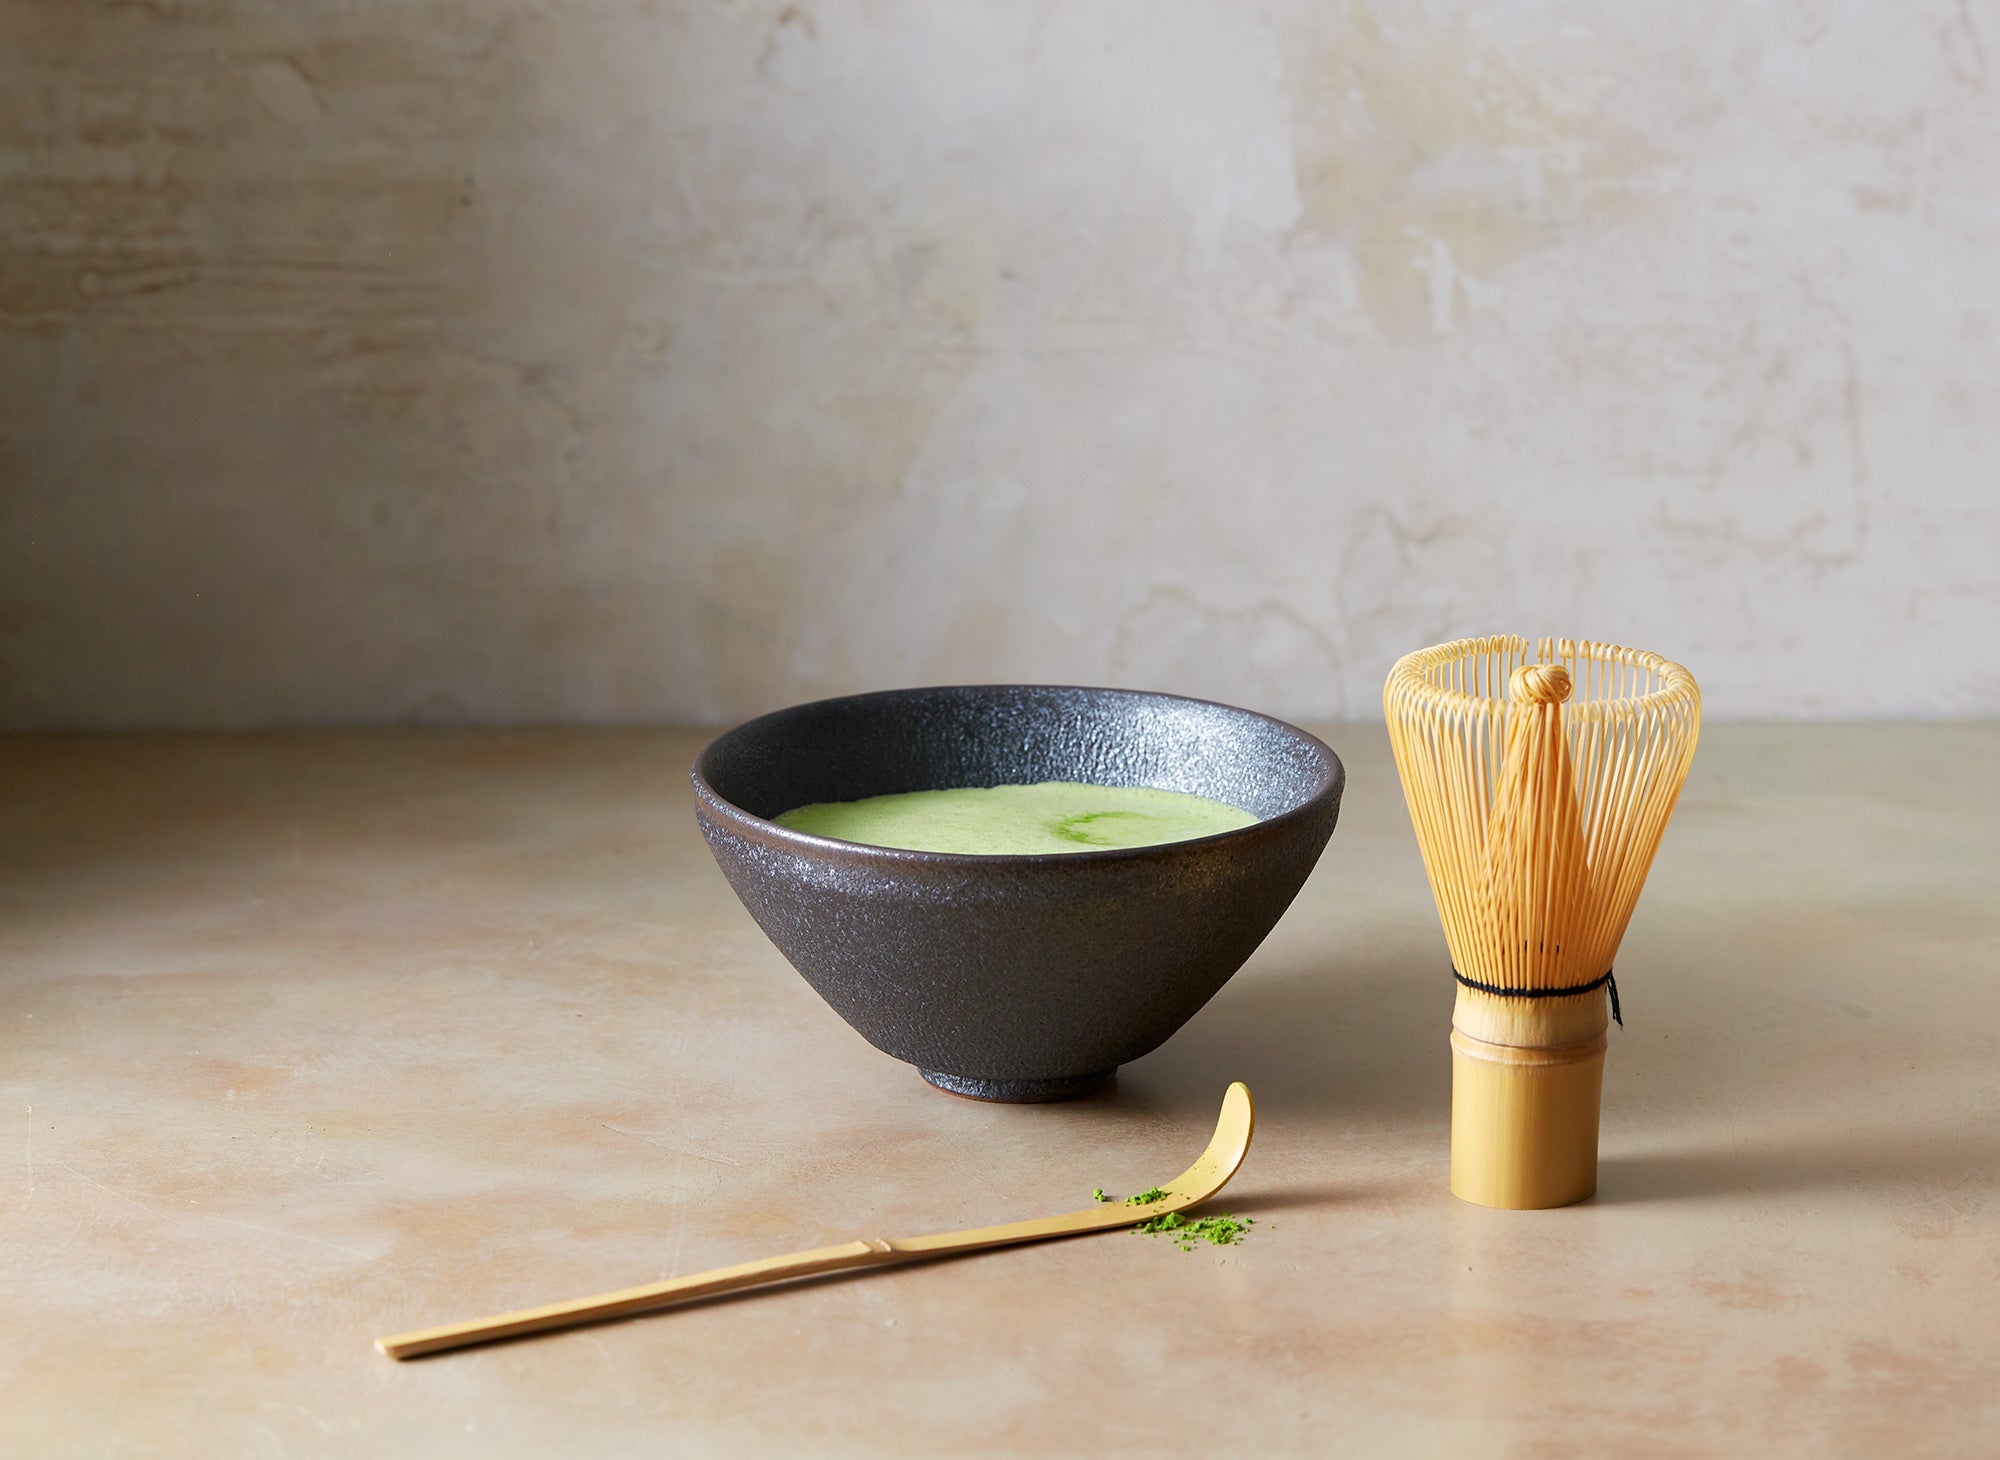 Shop matcha tea accessories from BELLOCQ and discover your new tea ritual. Explore matcha utensils and supplies from the finest artisans in the world.